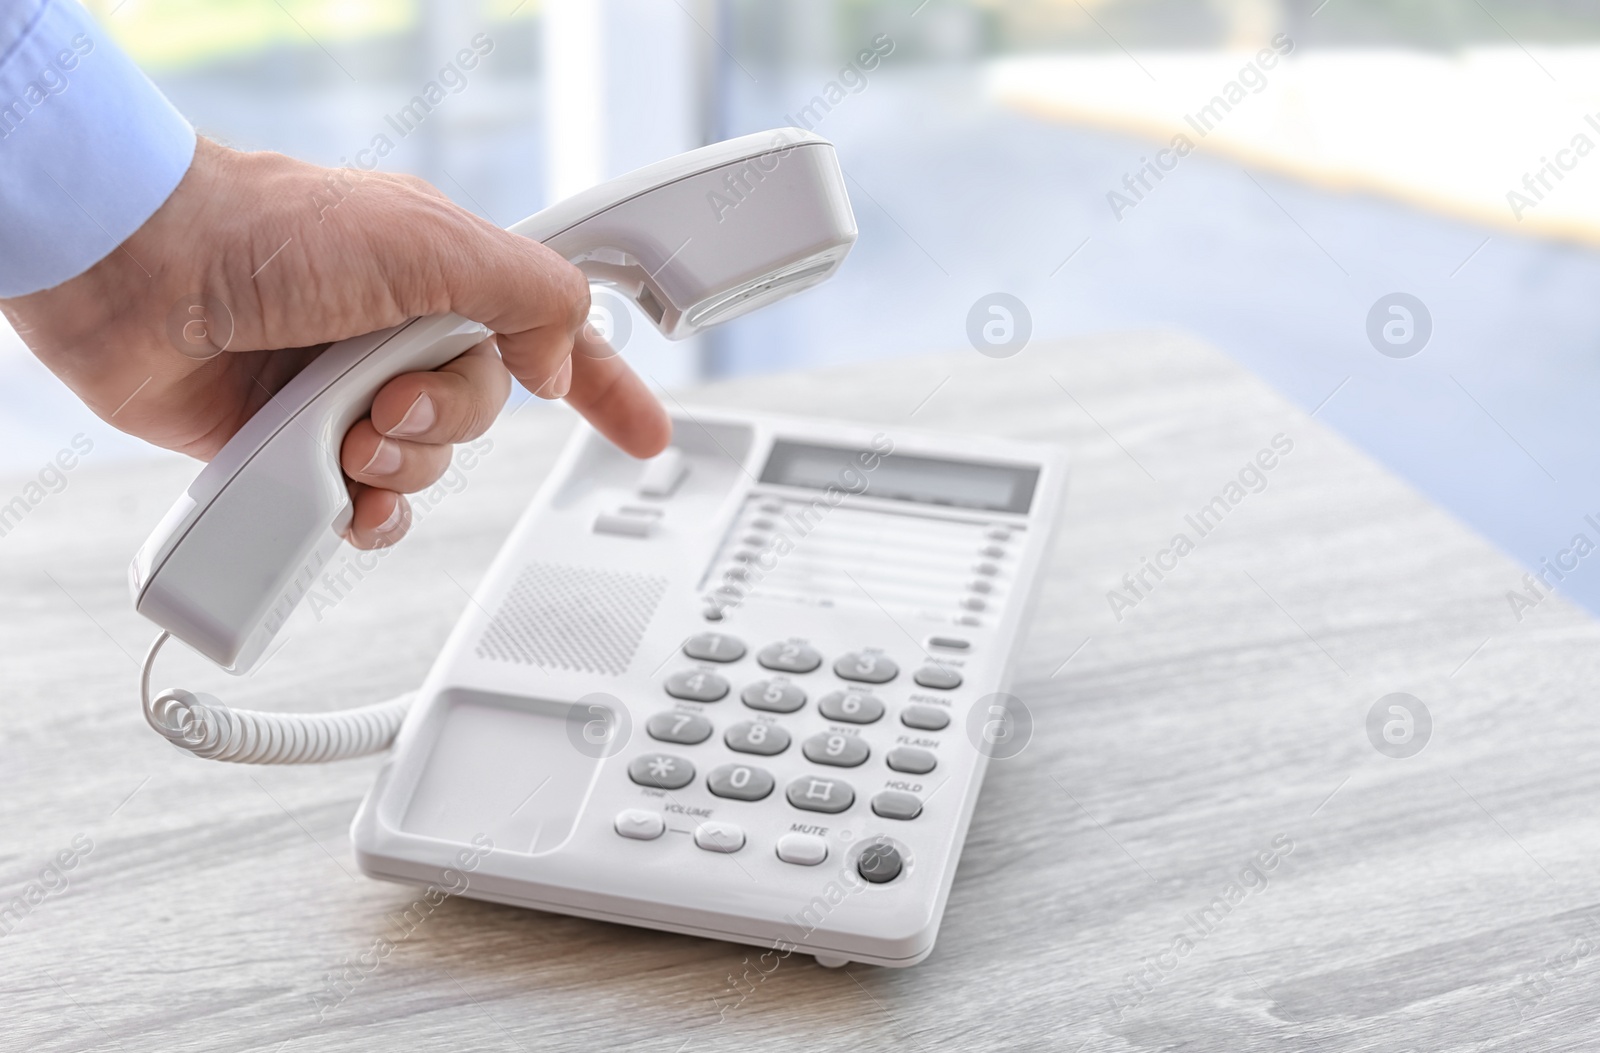 Photo of Man dialing number on telephone at table indoors